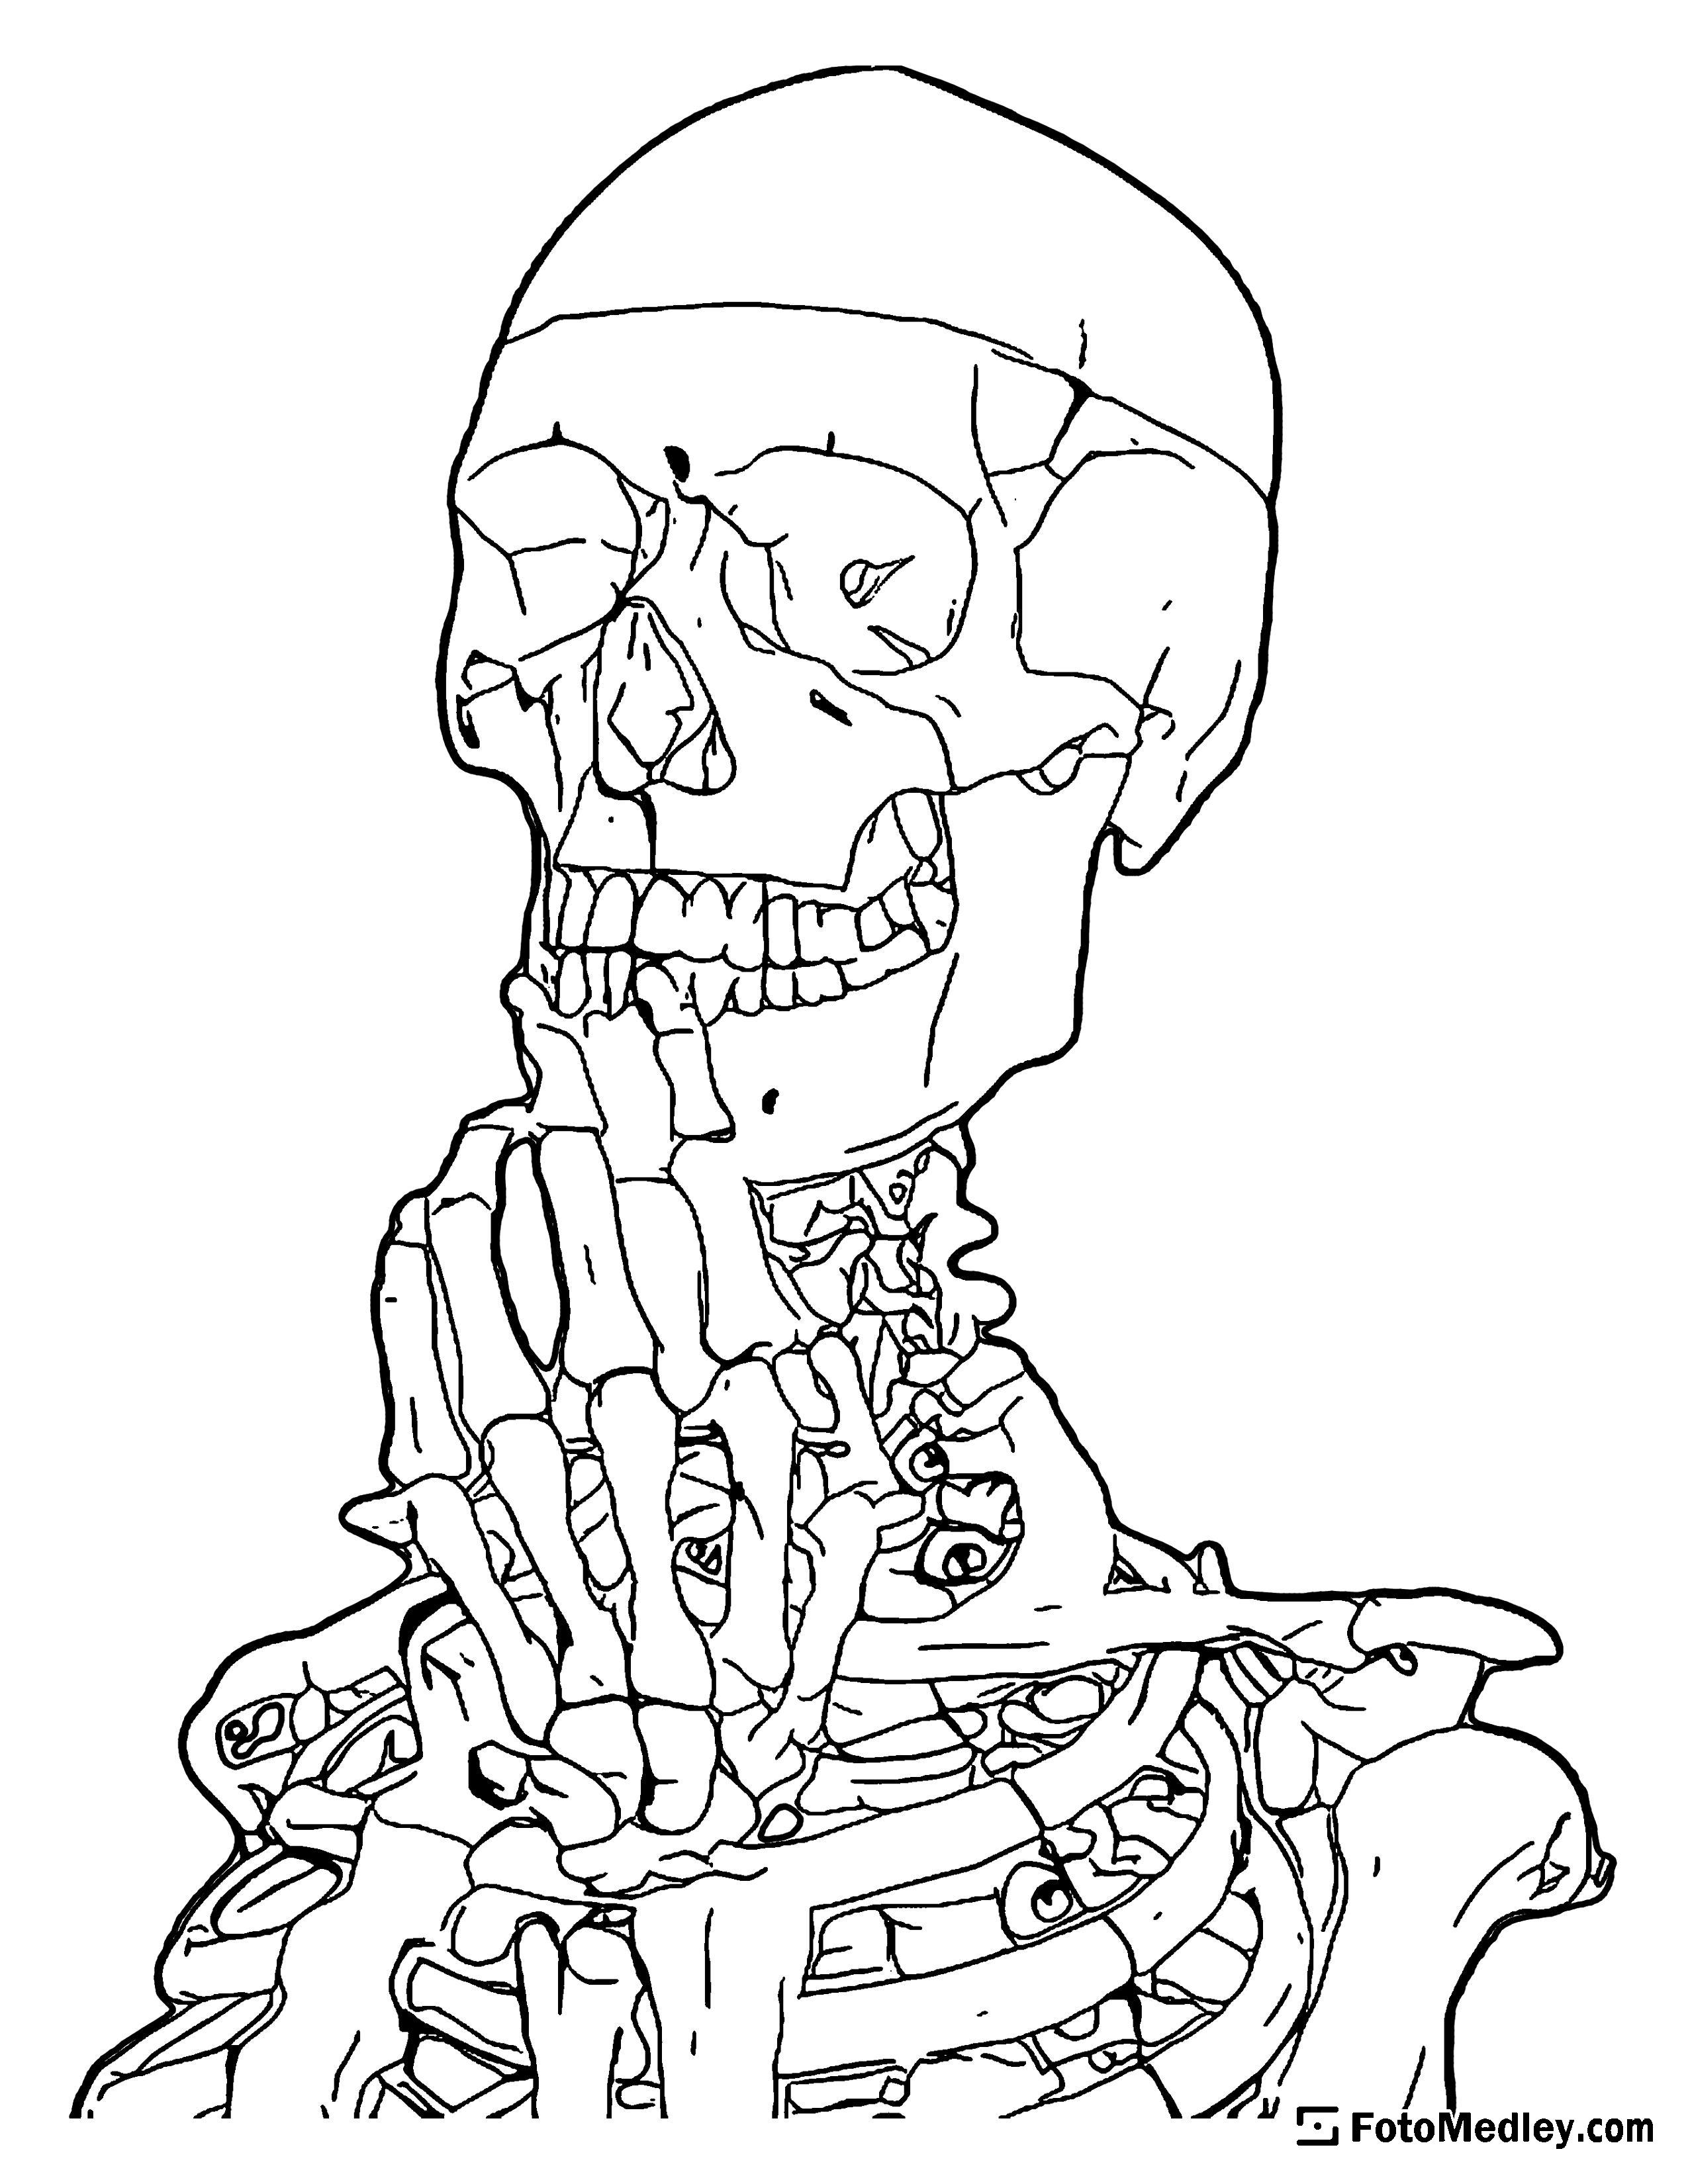 A Halloween coloring sheet of a skeleton in a thoughtful pose.